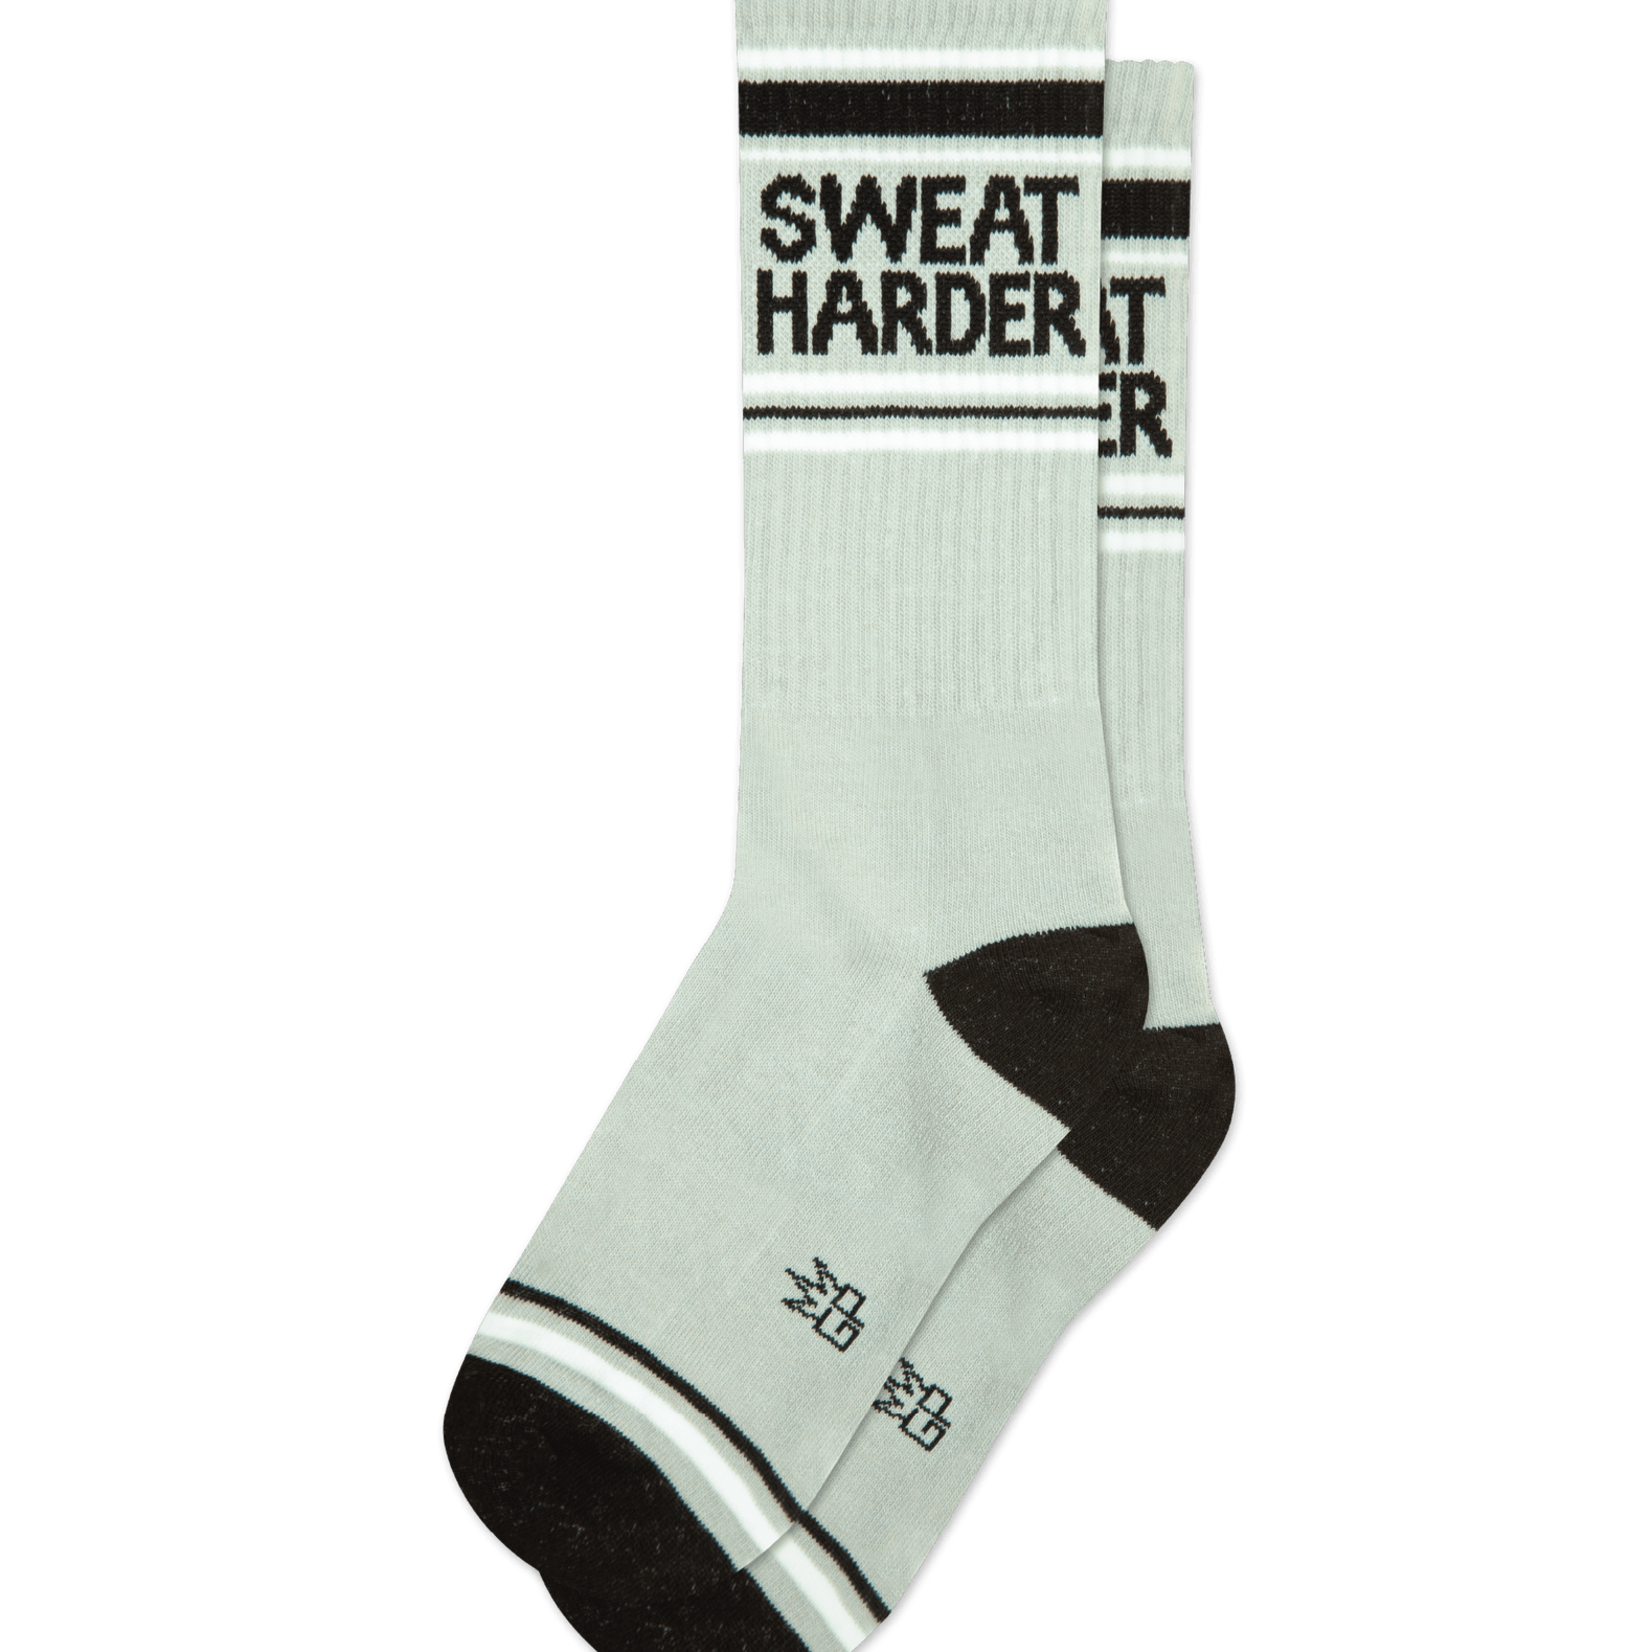 Gumball Poodle Gumball Poodle - Crew Socks - Sweat Harder